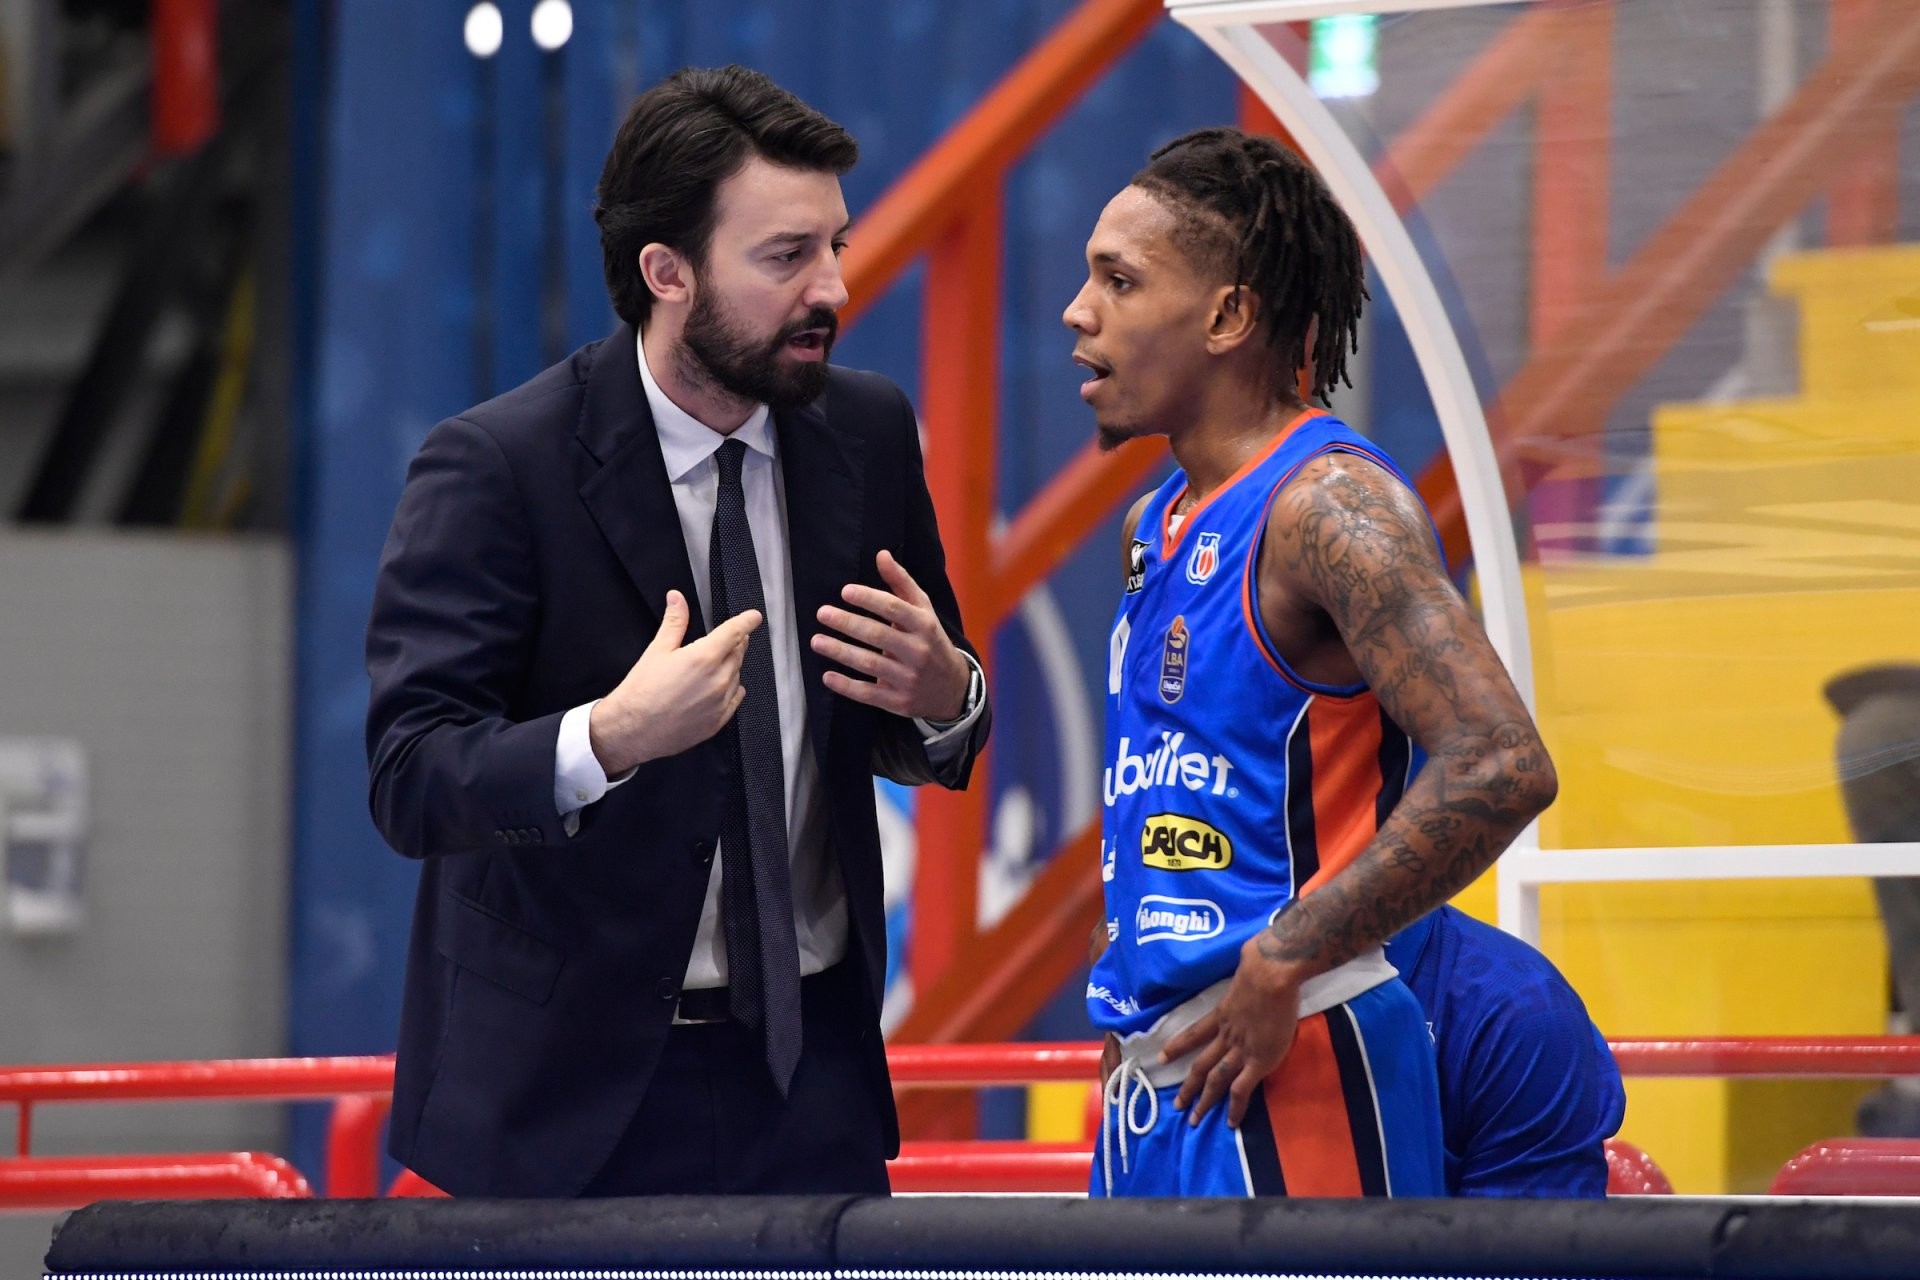 "Nymburk" head coach: "We don't need to win by 30 points, the main thing is that...